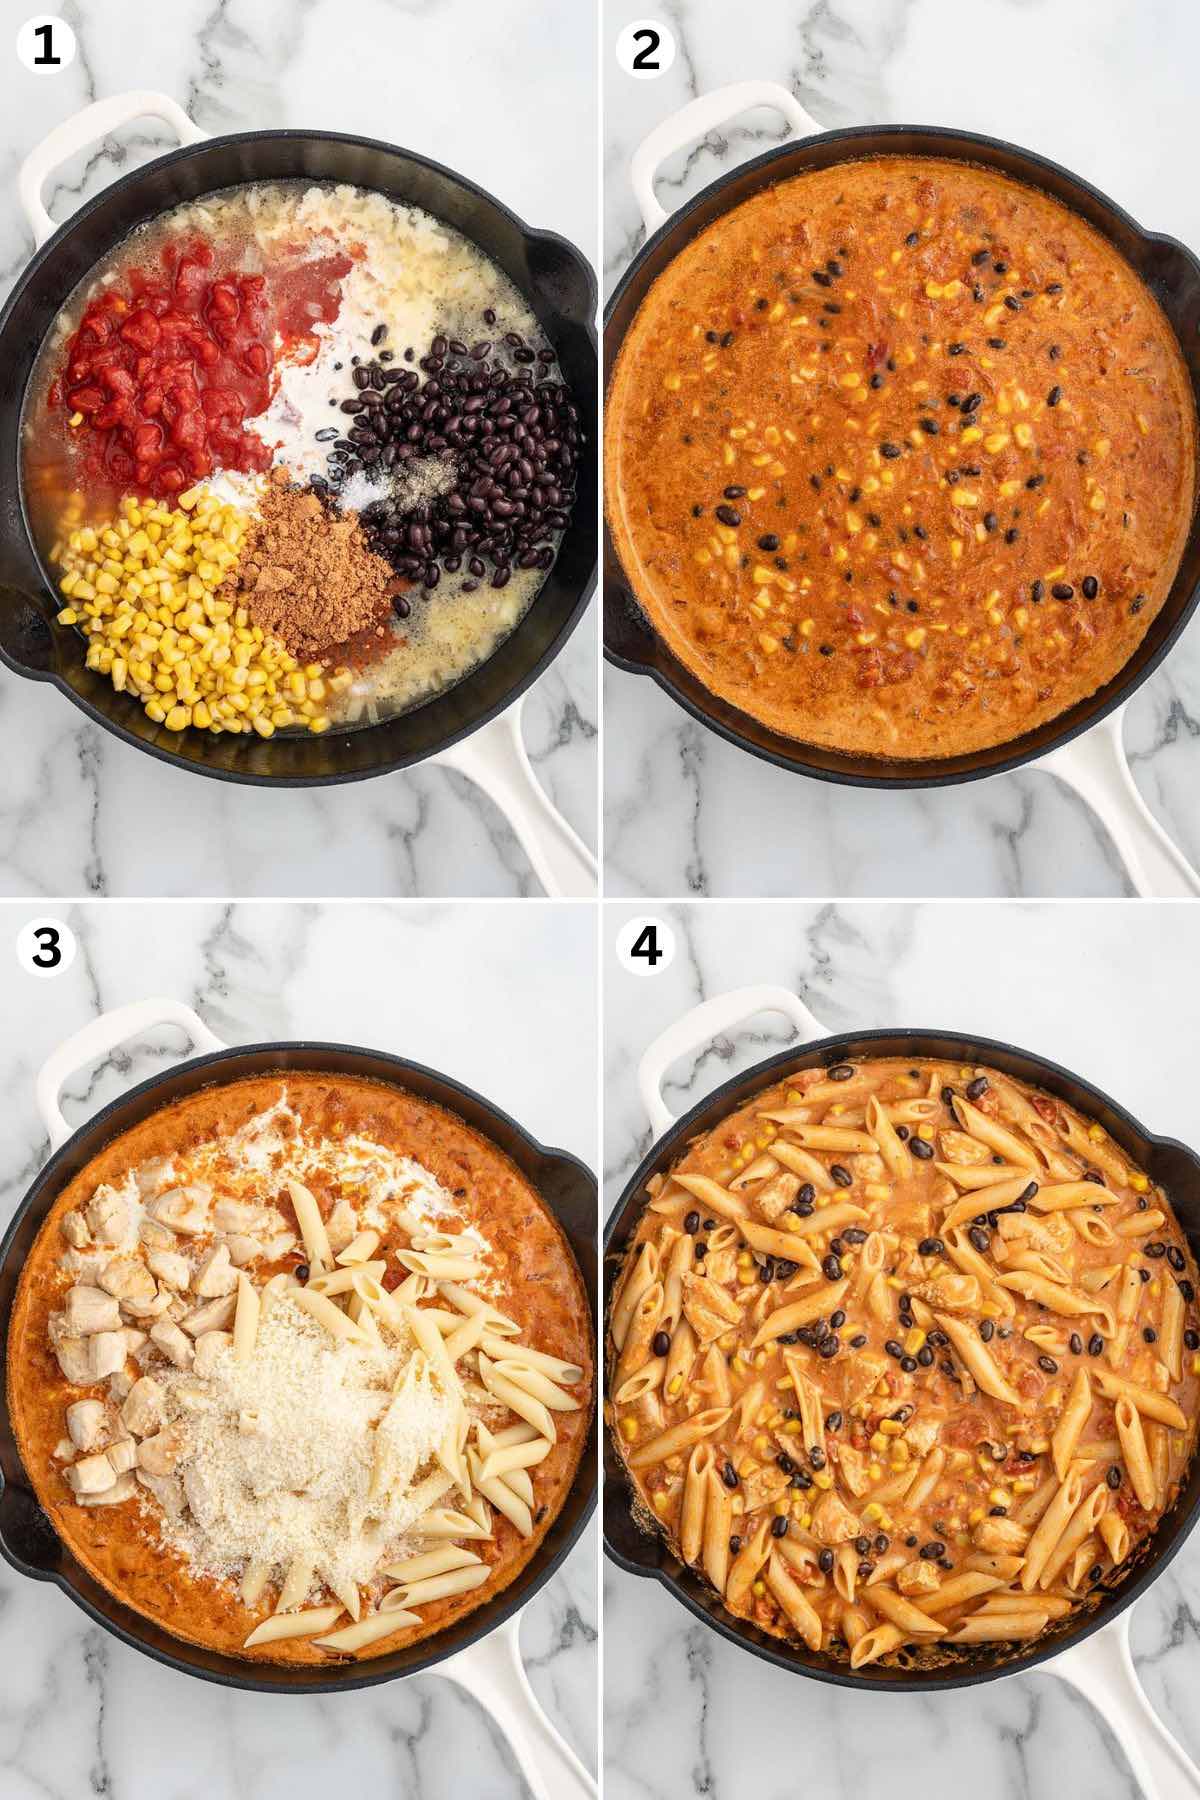 In a large skillet, combine the ingredients. Stir and let it simmer. Add the heavy cream, cooked chicken pieces, pasta, and parmesan cheese. Stir to combine and fully coat the pasta with the sauce.